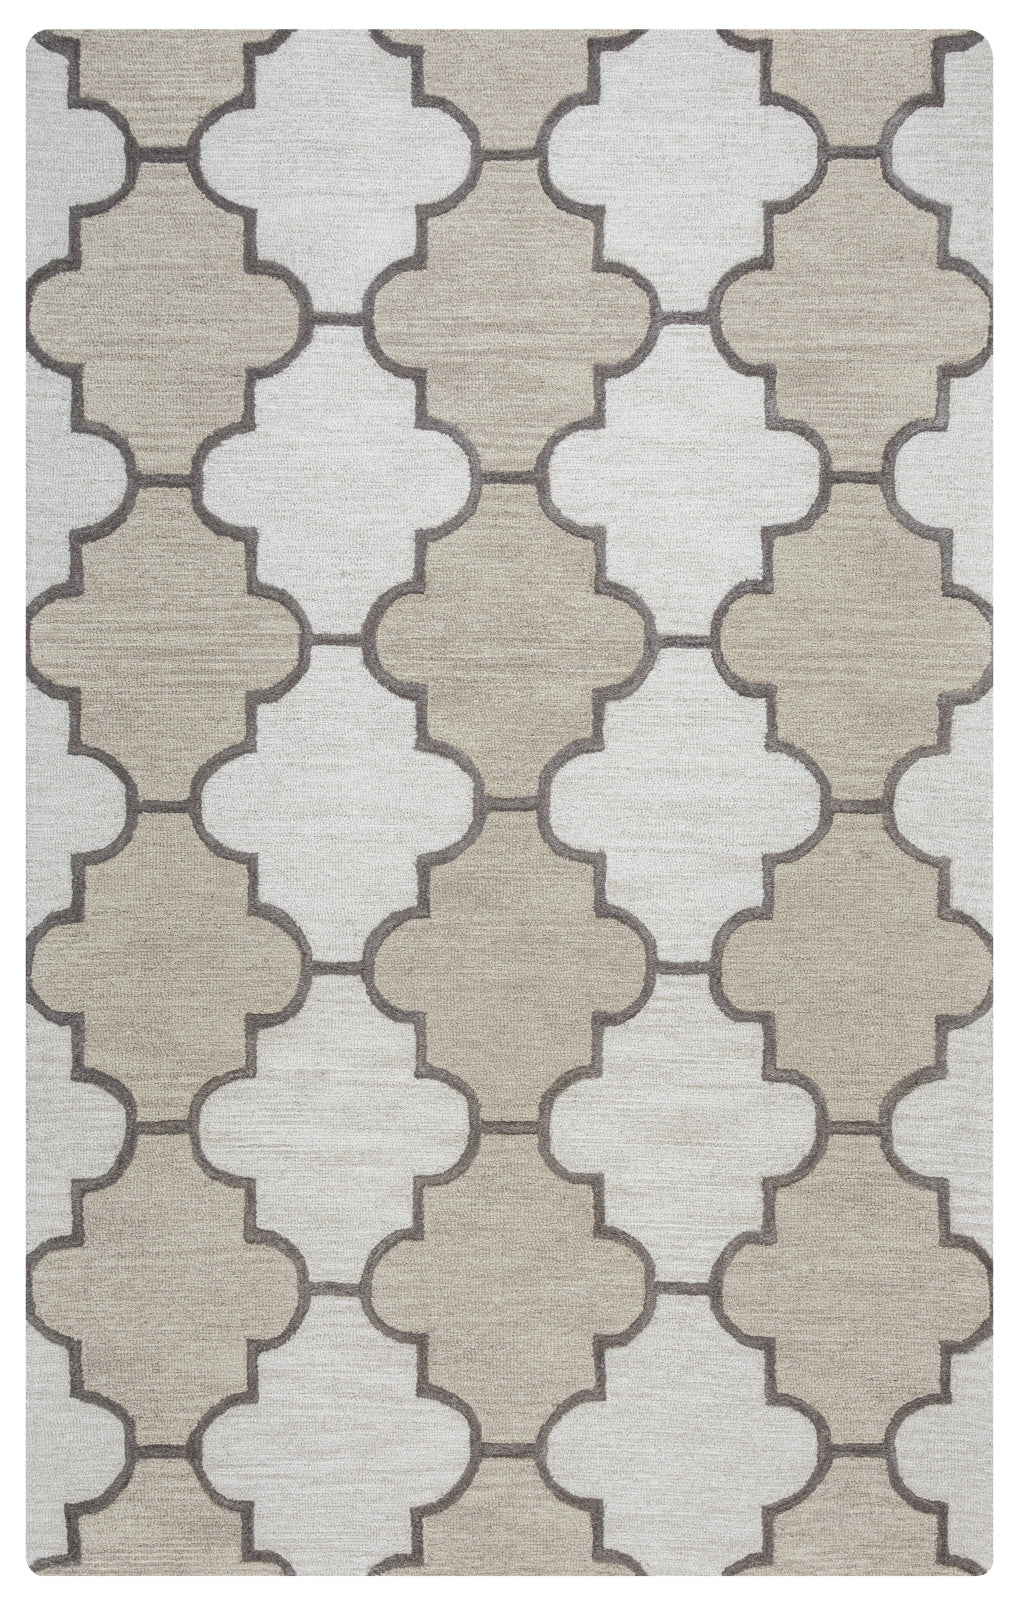 Rizzy Caterine CE9533 Ivory Area Rug main image